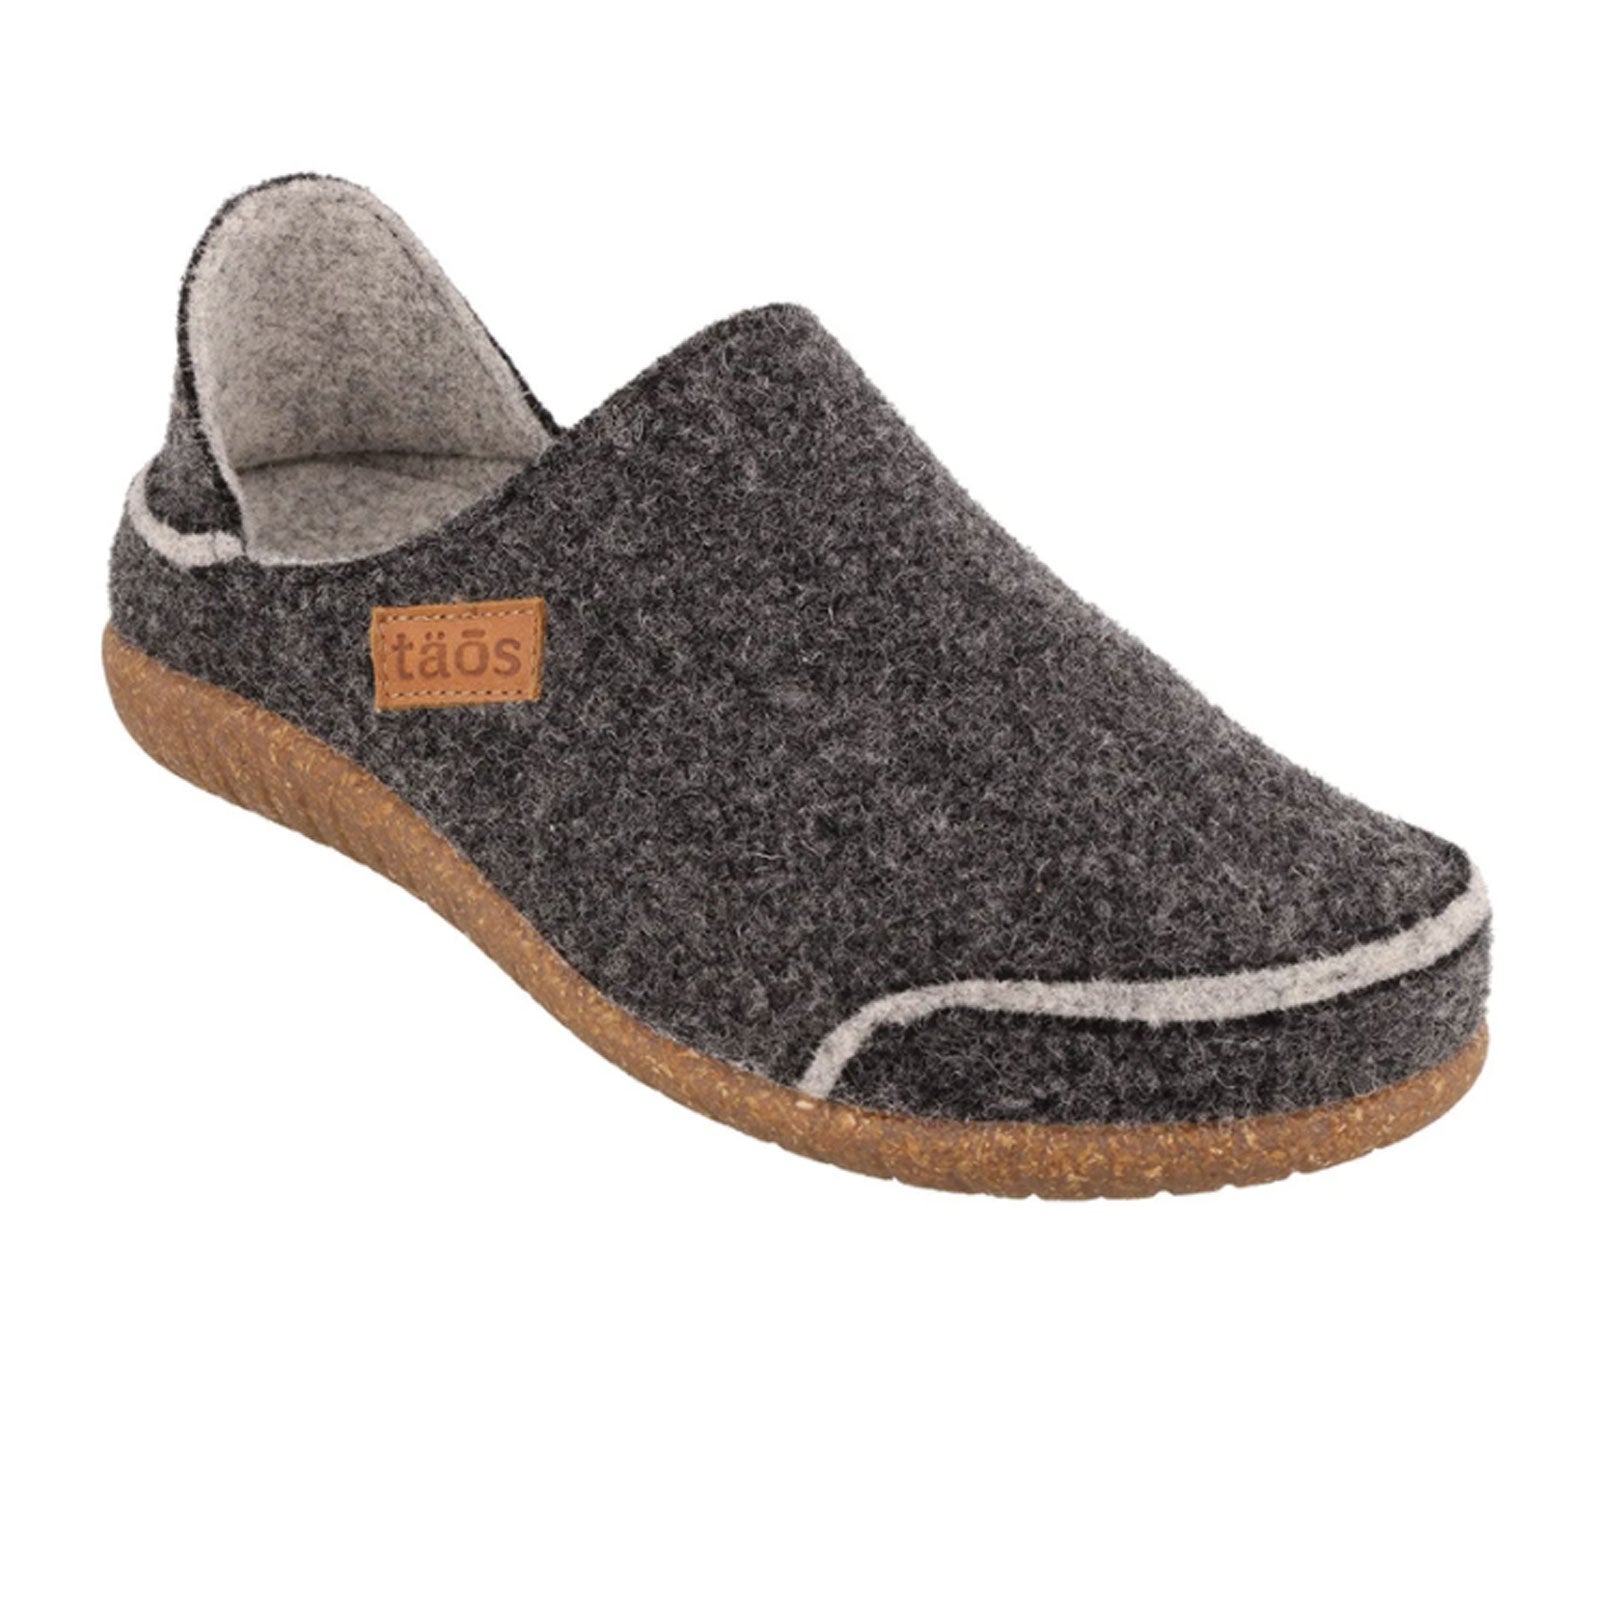 Taos Convertawool Slip On (Unisex) - Charcoal Dress-Casual - Slip Ons - The Heel Shoe Fitters